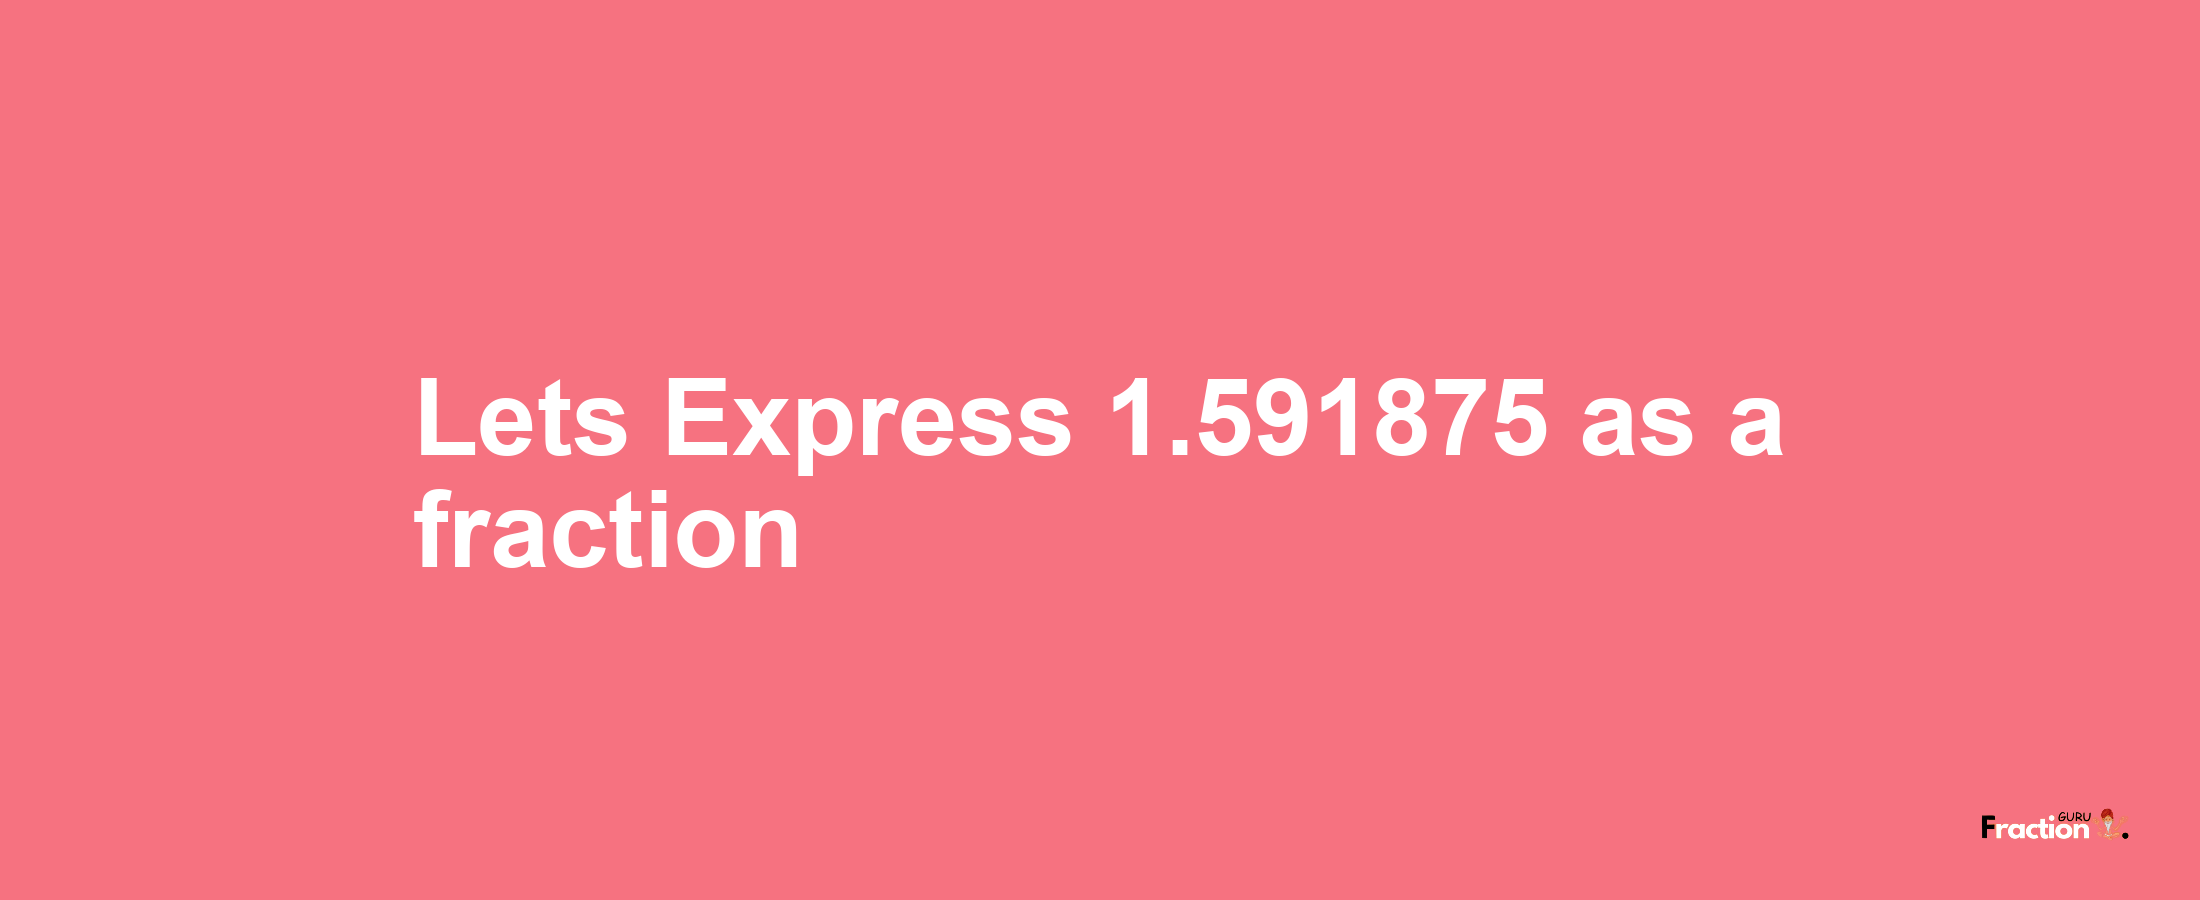 Lets Express 1.591875 as afraction